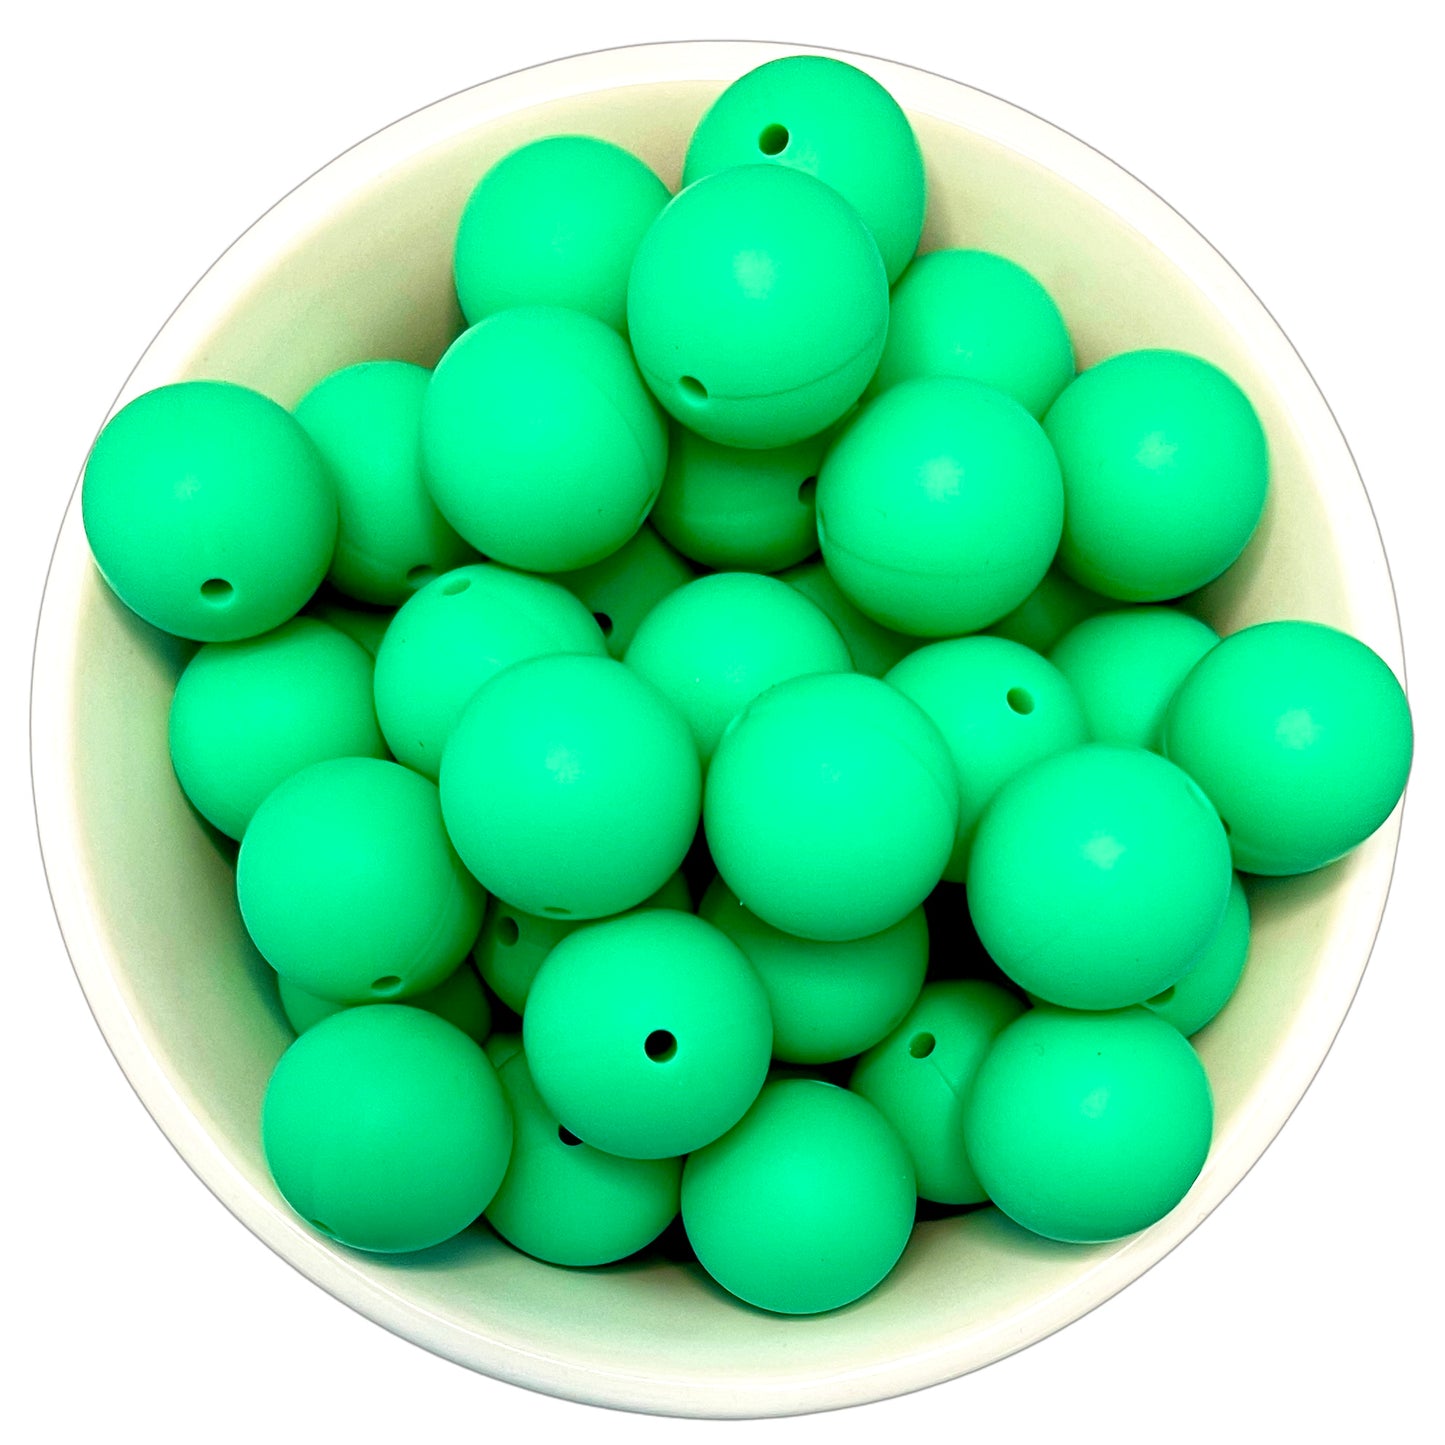 Easter Green 19mm Silicone Beads - 5 pk.